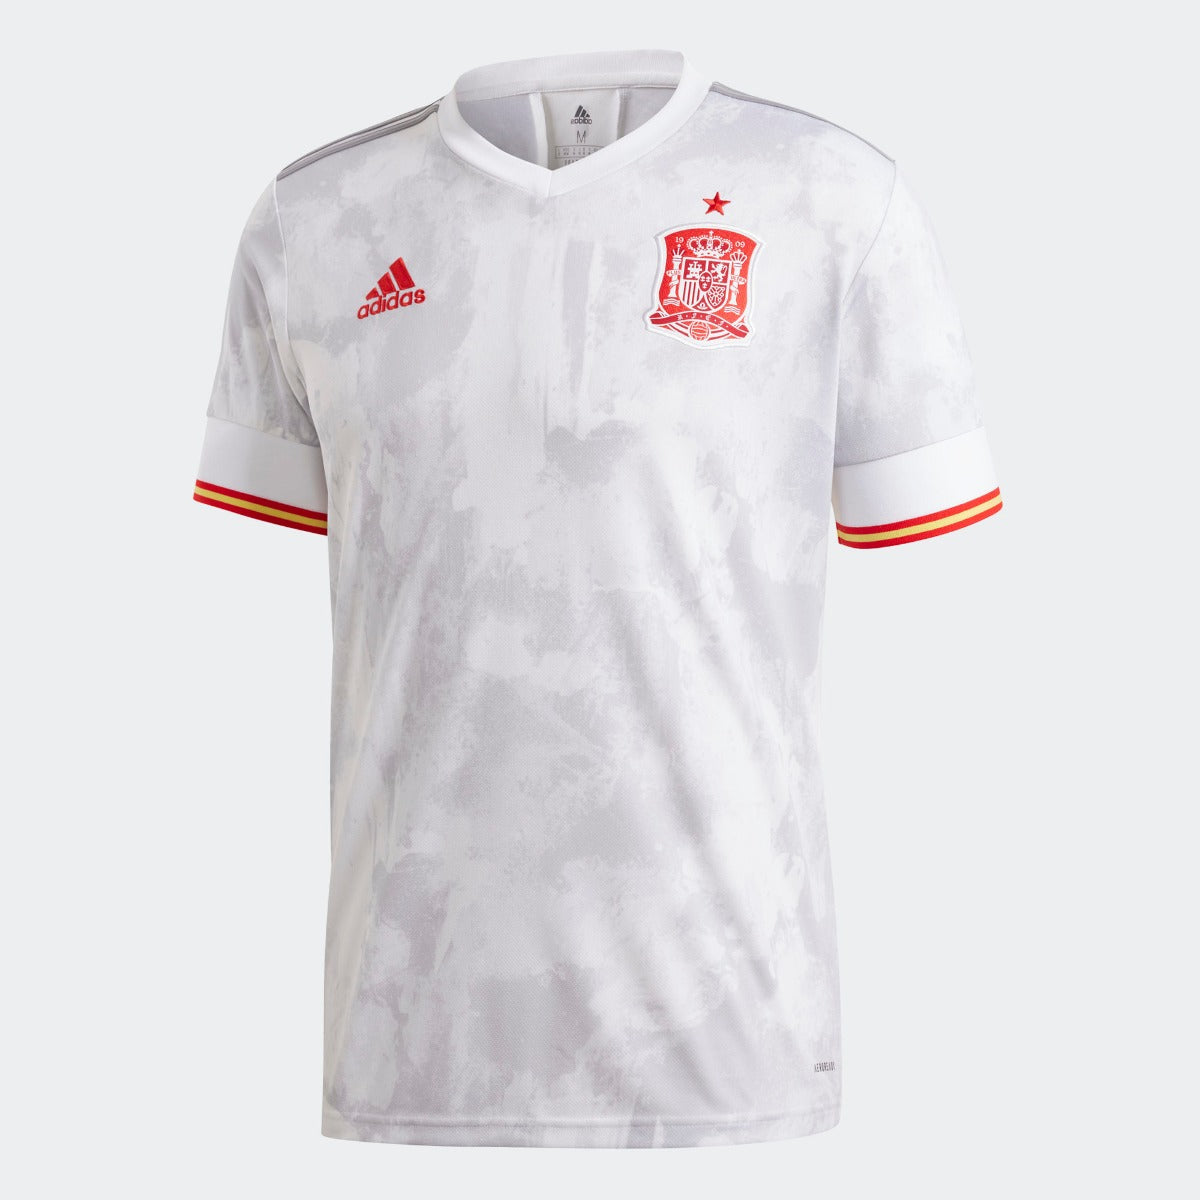 2020-21 Spain Away Jersey White-Red